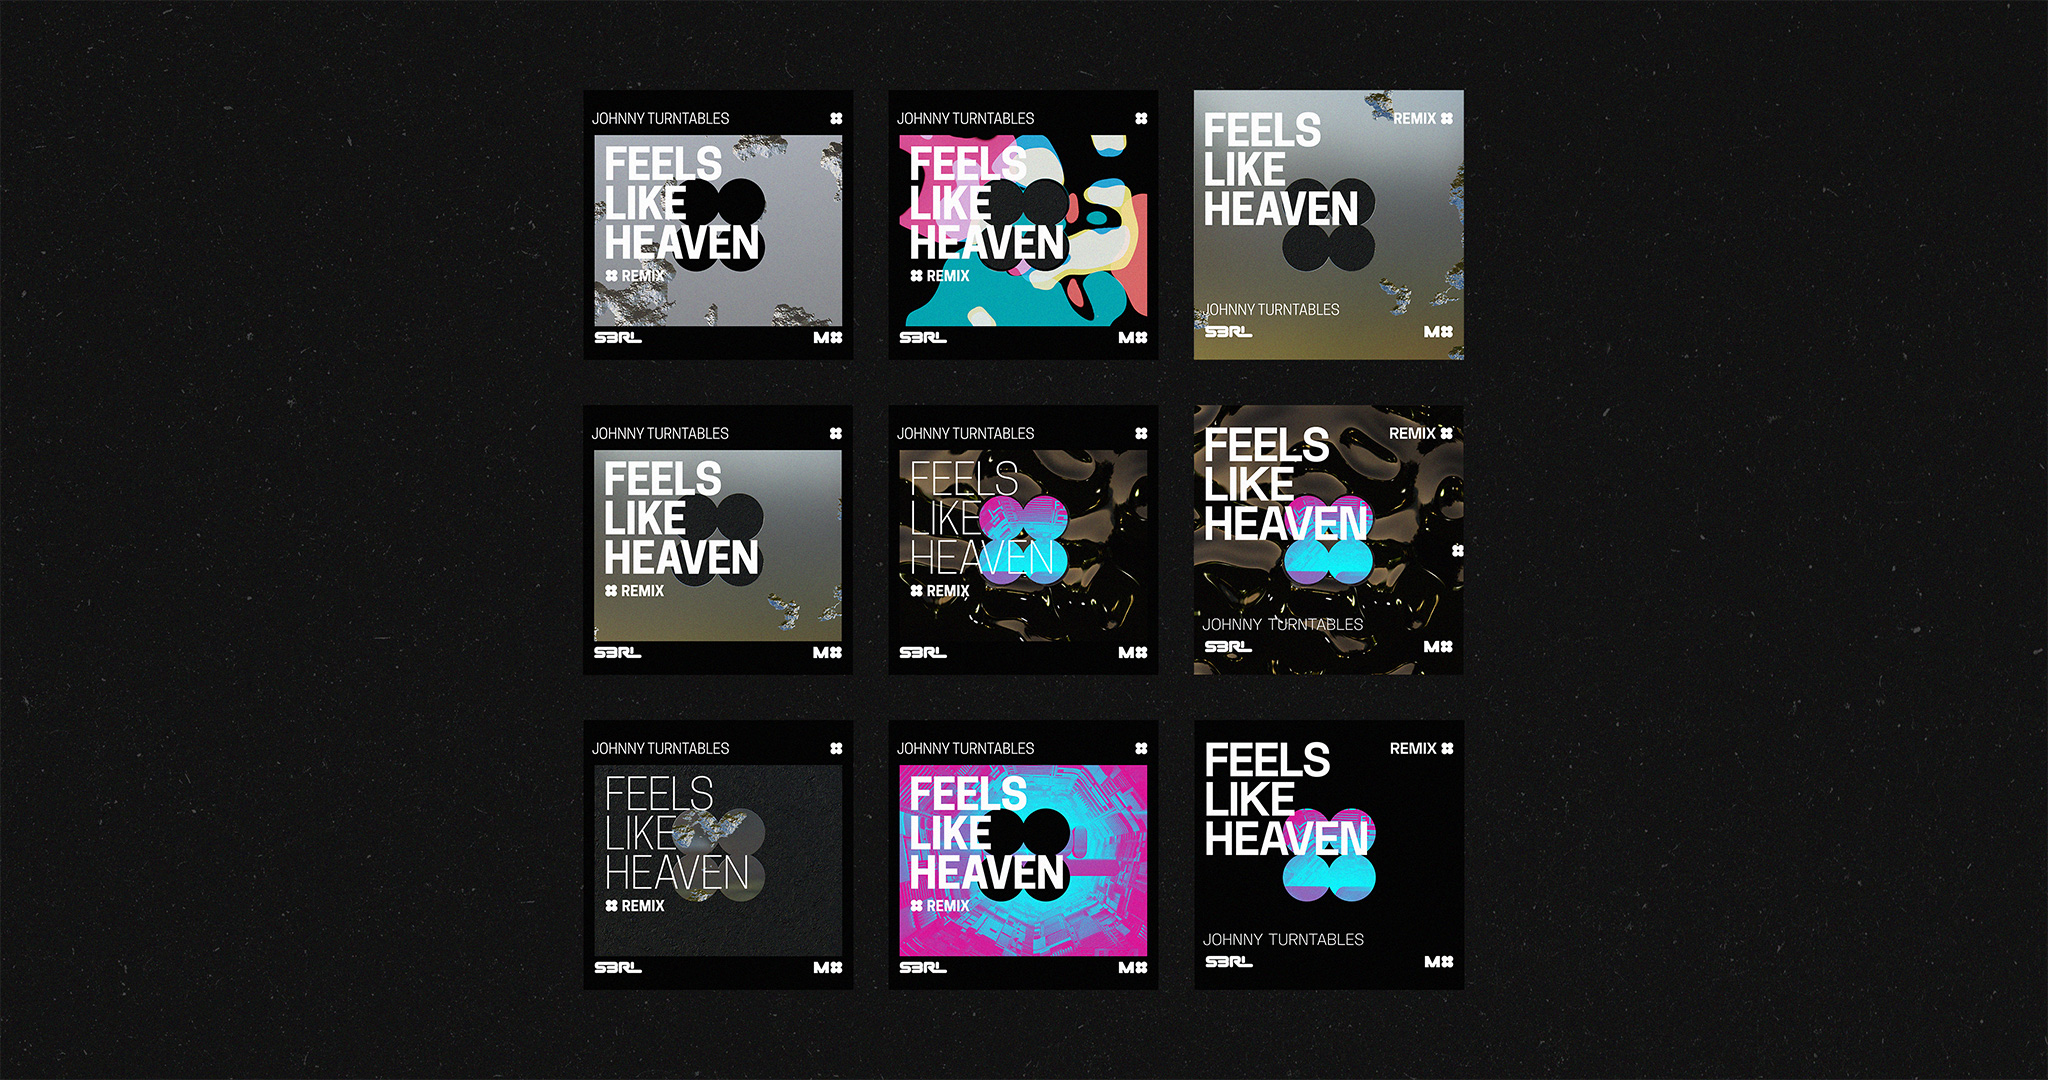 A grid-based collage of images featuring multiple prototype-versions of music cover art.